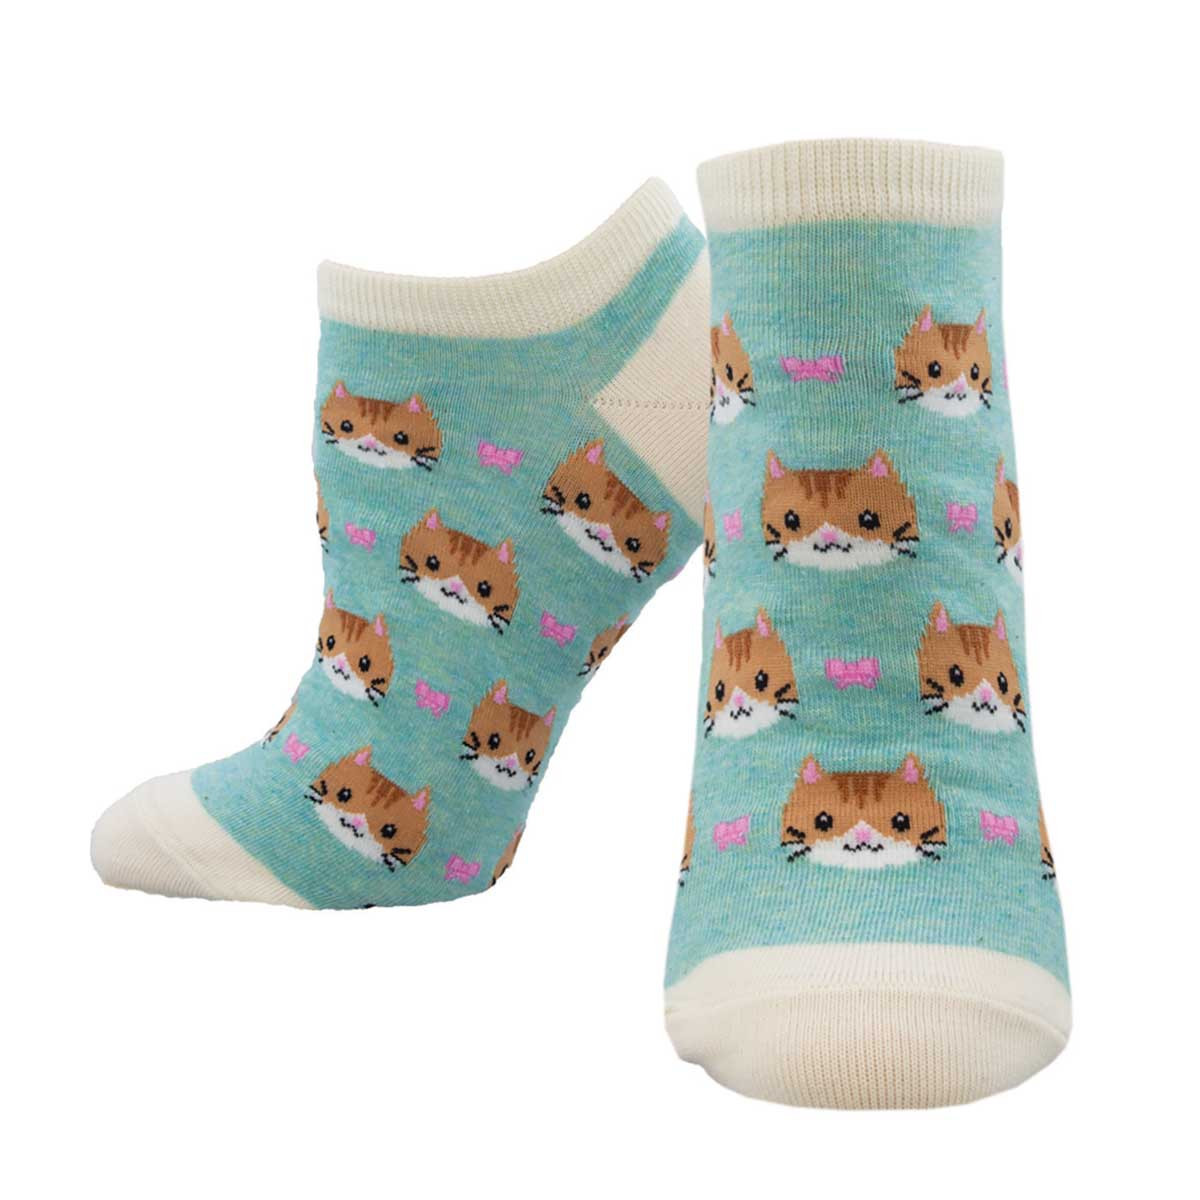 OOS_Women's Hearty Kitty Ankle (Blue Heather)